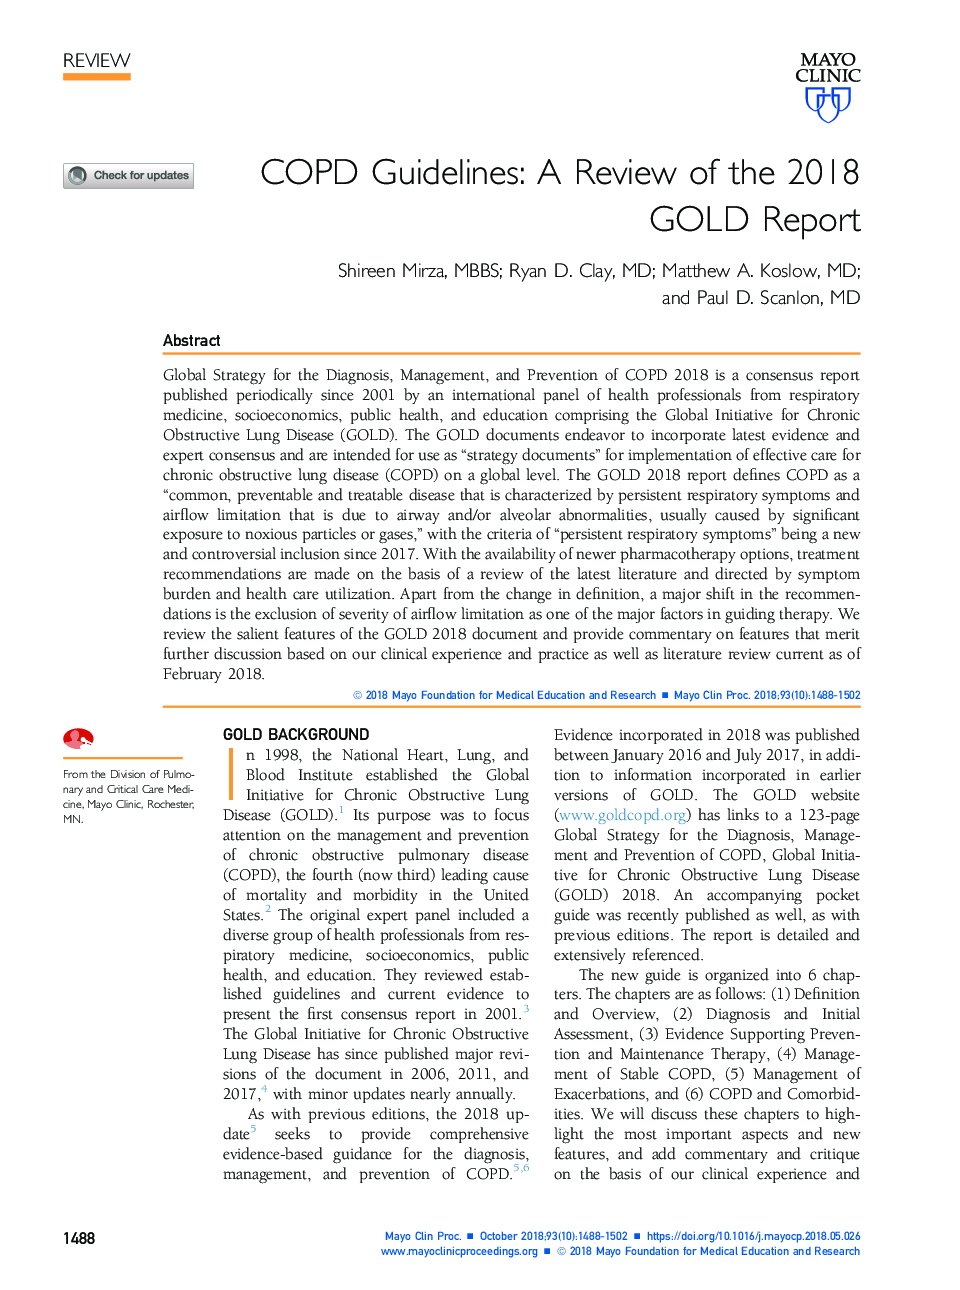 COPD Guidelines: A Review of the 2018 GOLD Report